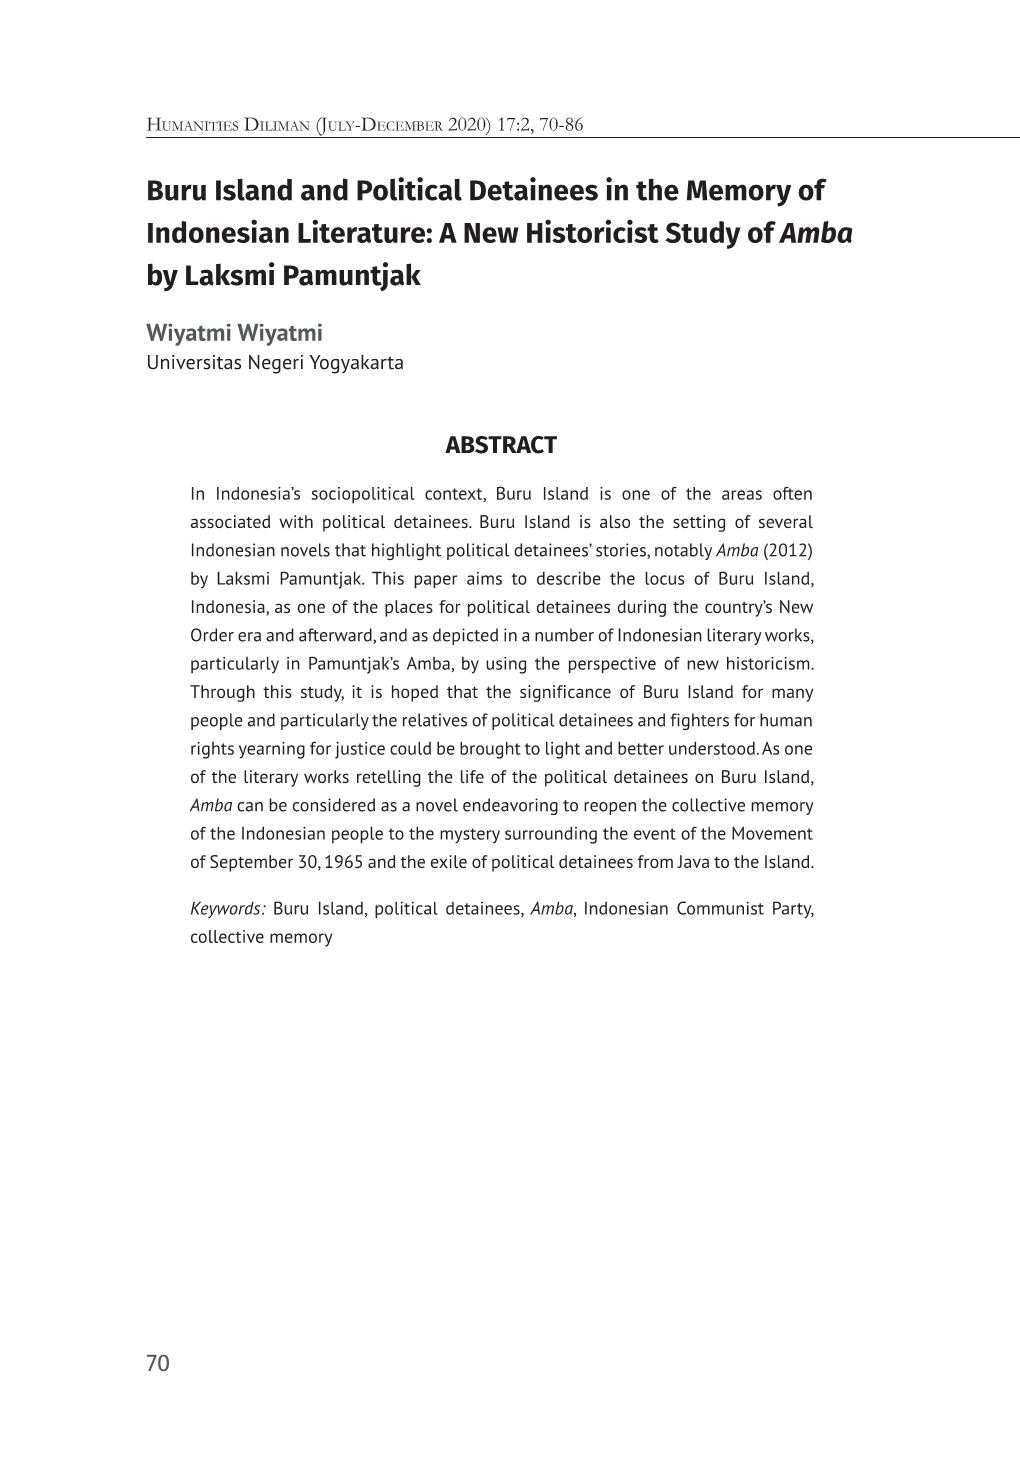 Buru Island and Political Detainees in the Memory of Indonesian Literature: a New Historicist Study of Amba by Laksmi Pamuntjak